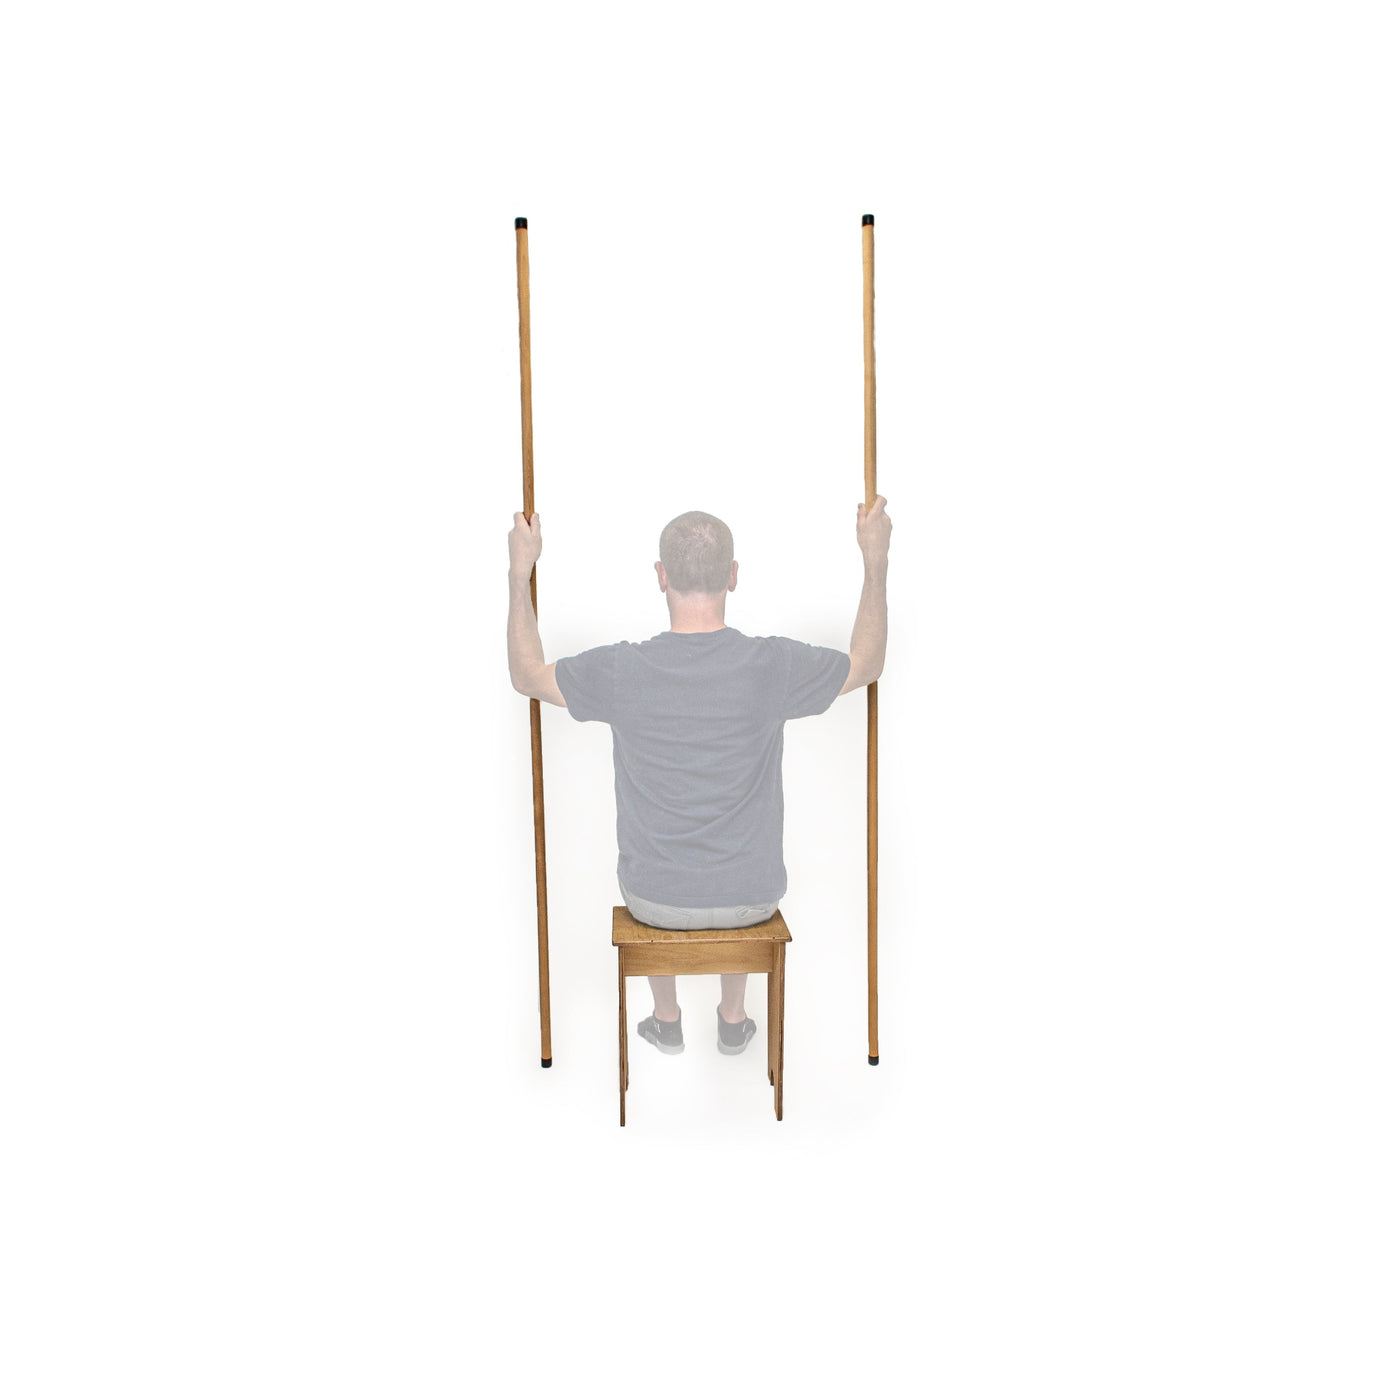 PSSE Wood Bench for Scoliosis and Kyphosis Therapy - Deals